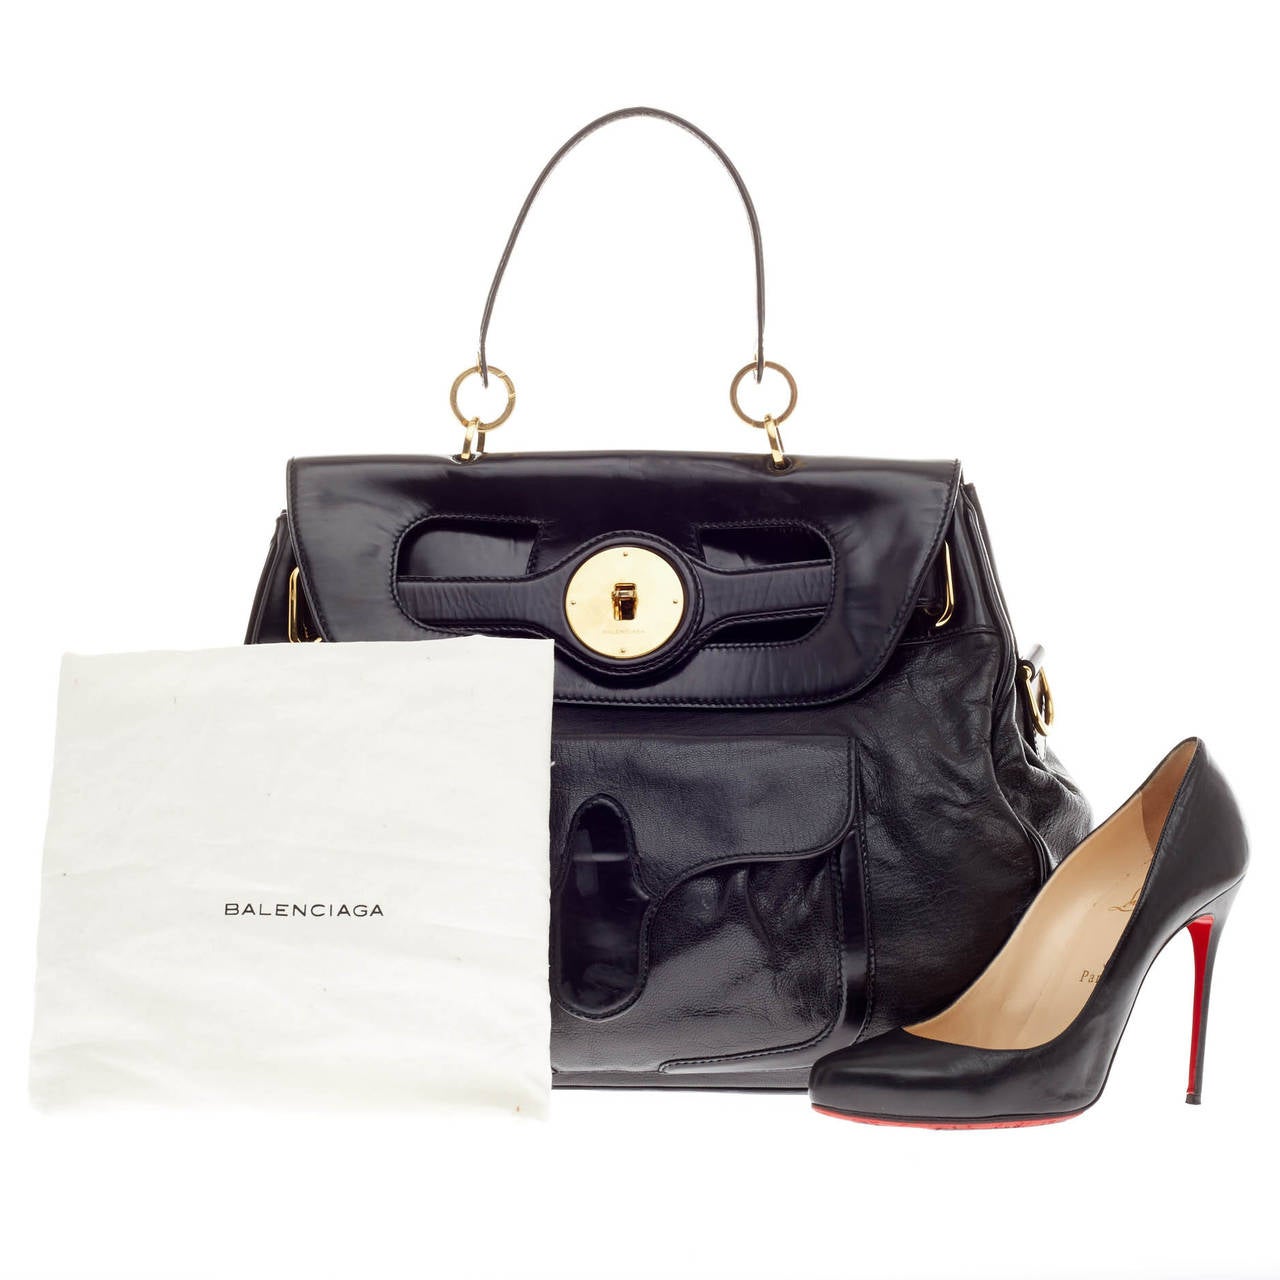 This authentic Balenciaga Lune Leather is a glamorous statement-making bag that complements both casual and sophisticated looks. Crafted from smooth black leather with patent leather accents, this bag features gold-tone hardware, twist-lock closure